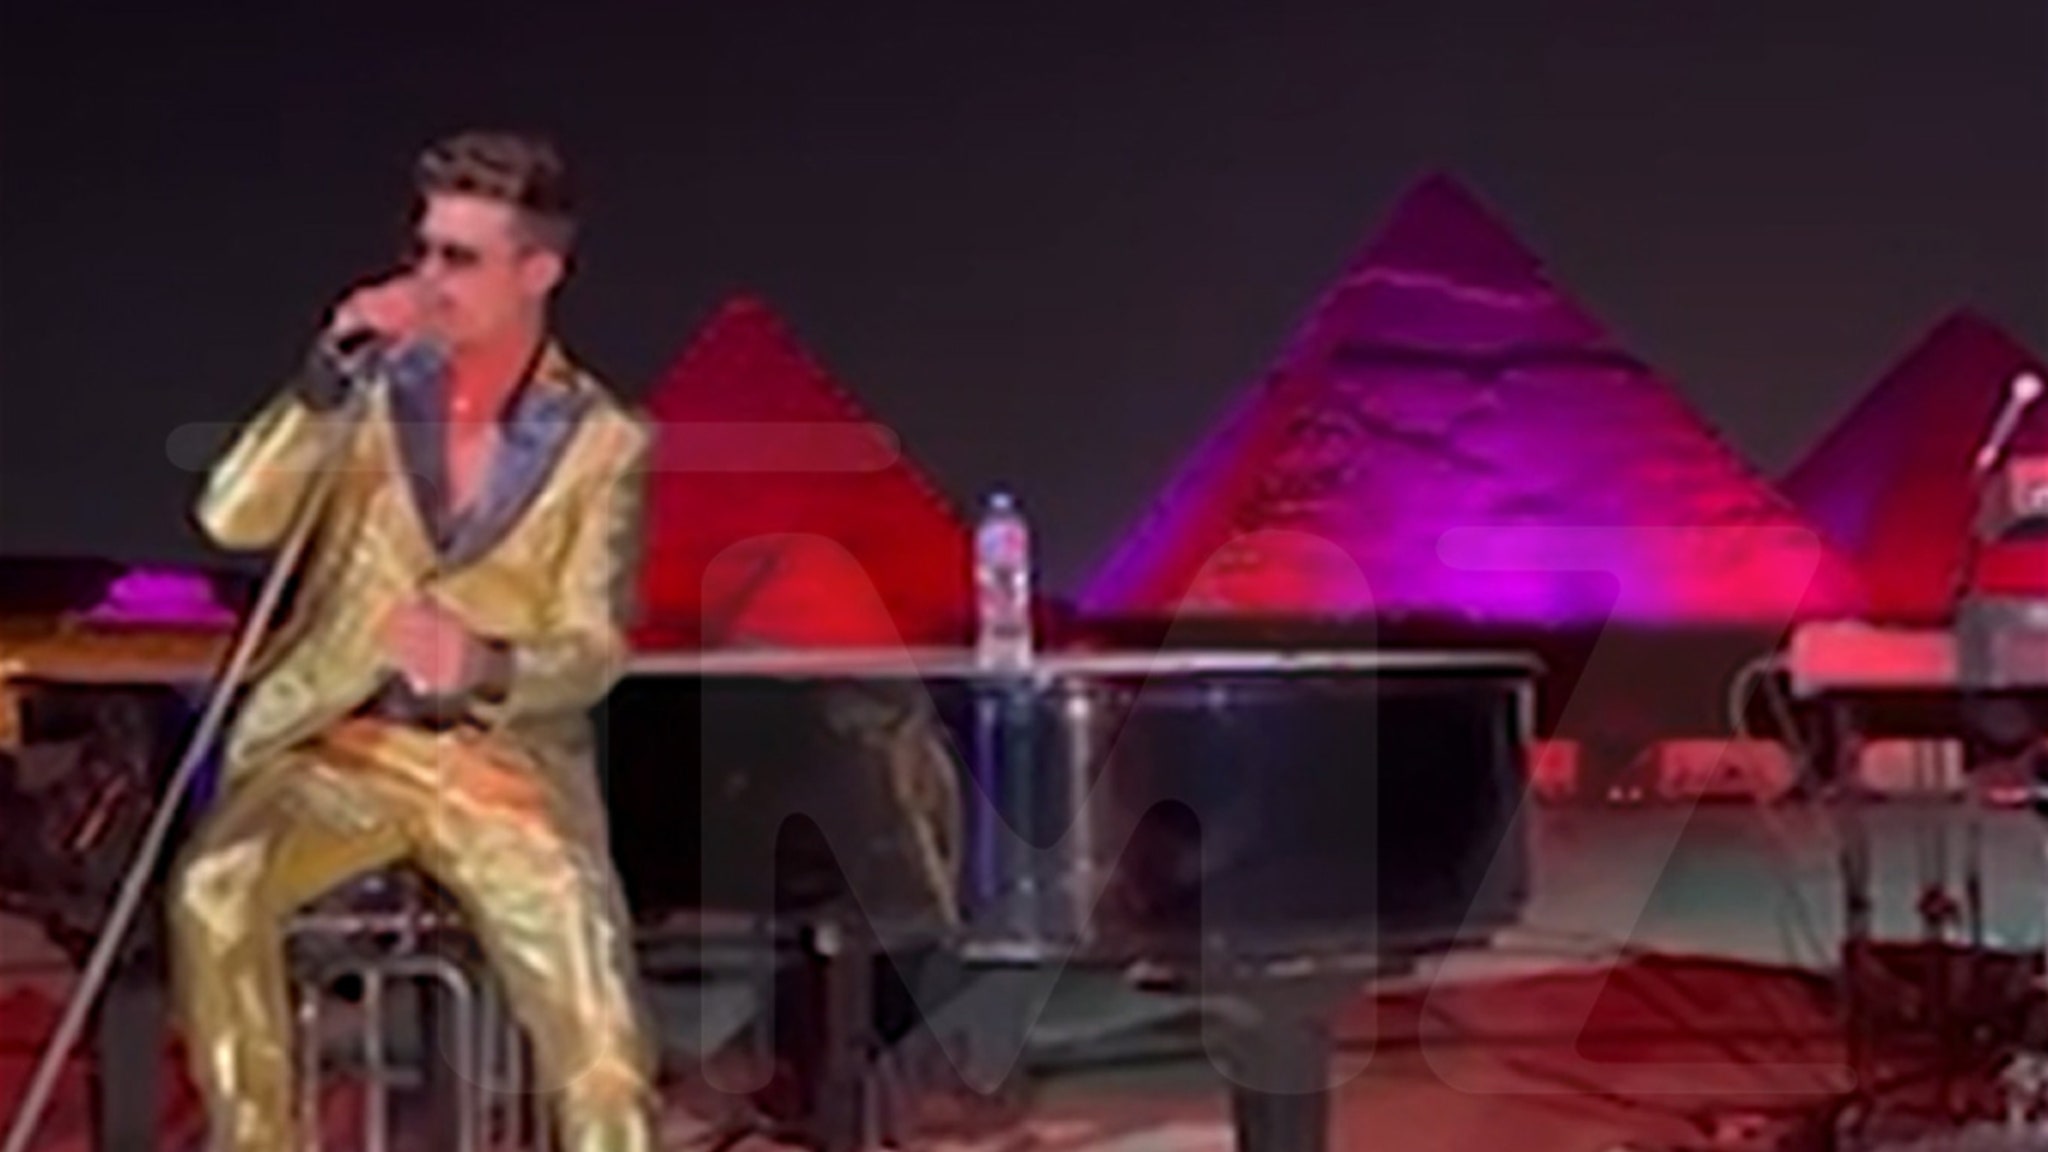 Robin Thicke Performs for Lavish Wedding at Base of Pyramids in Egypt